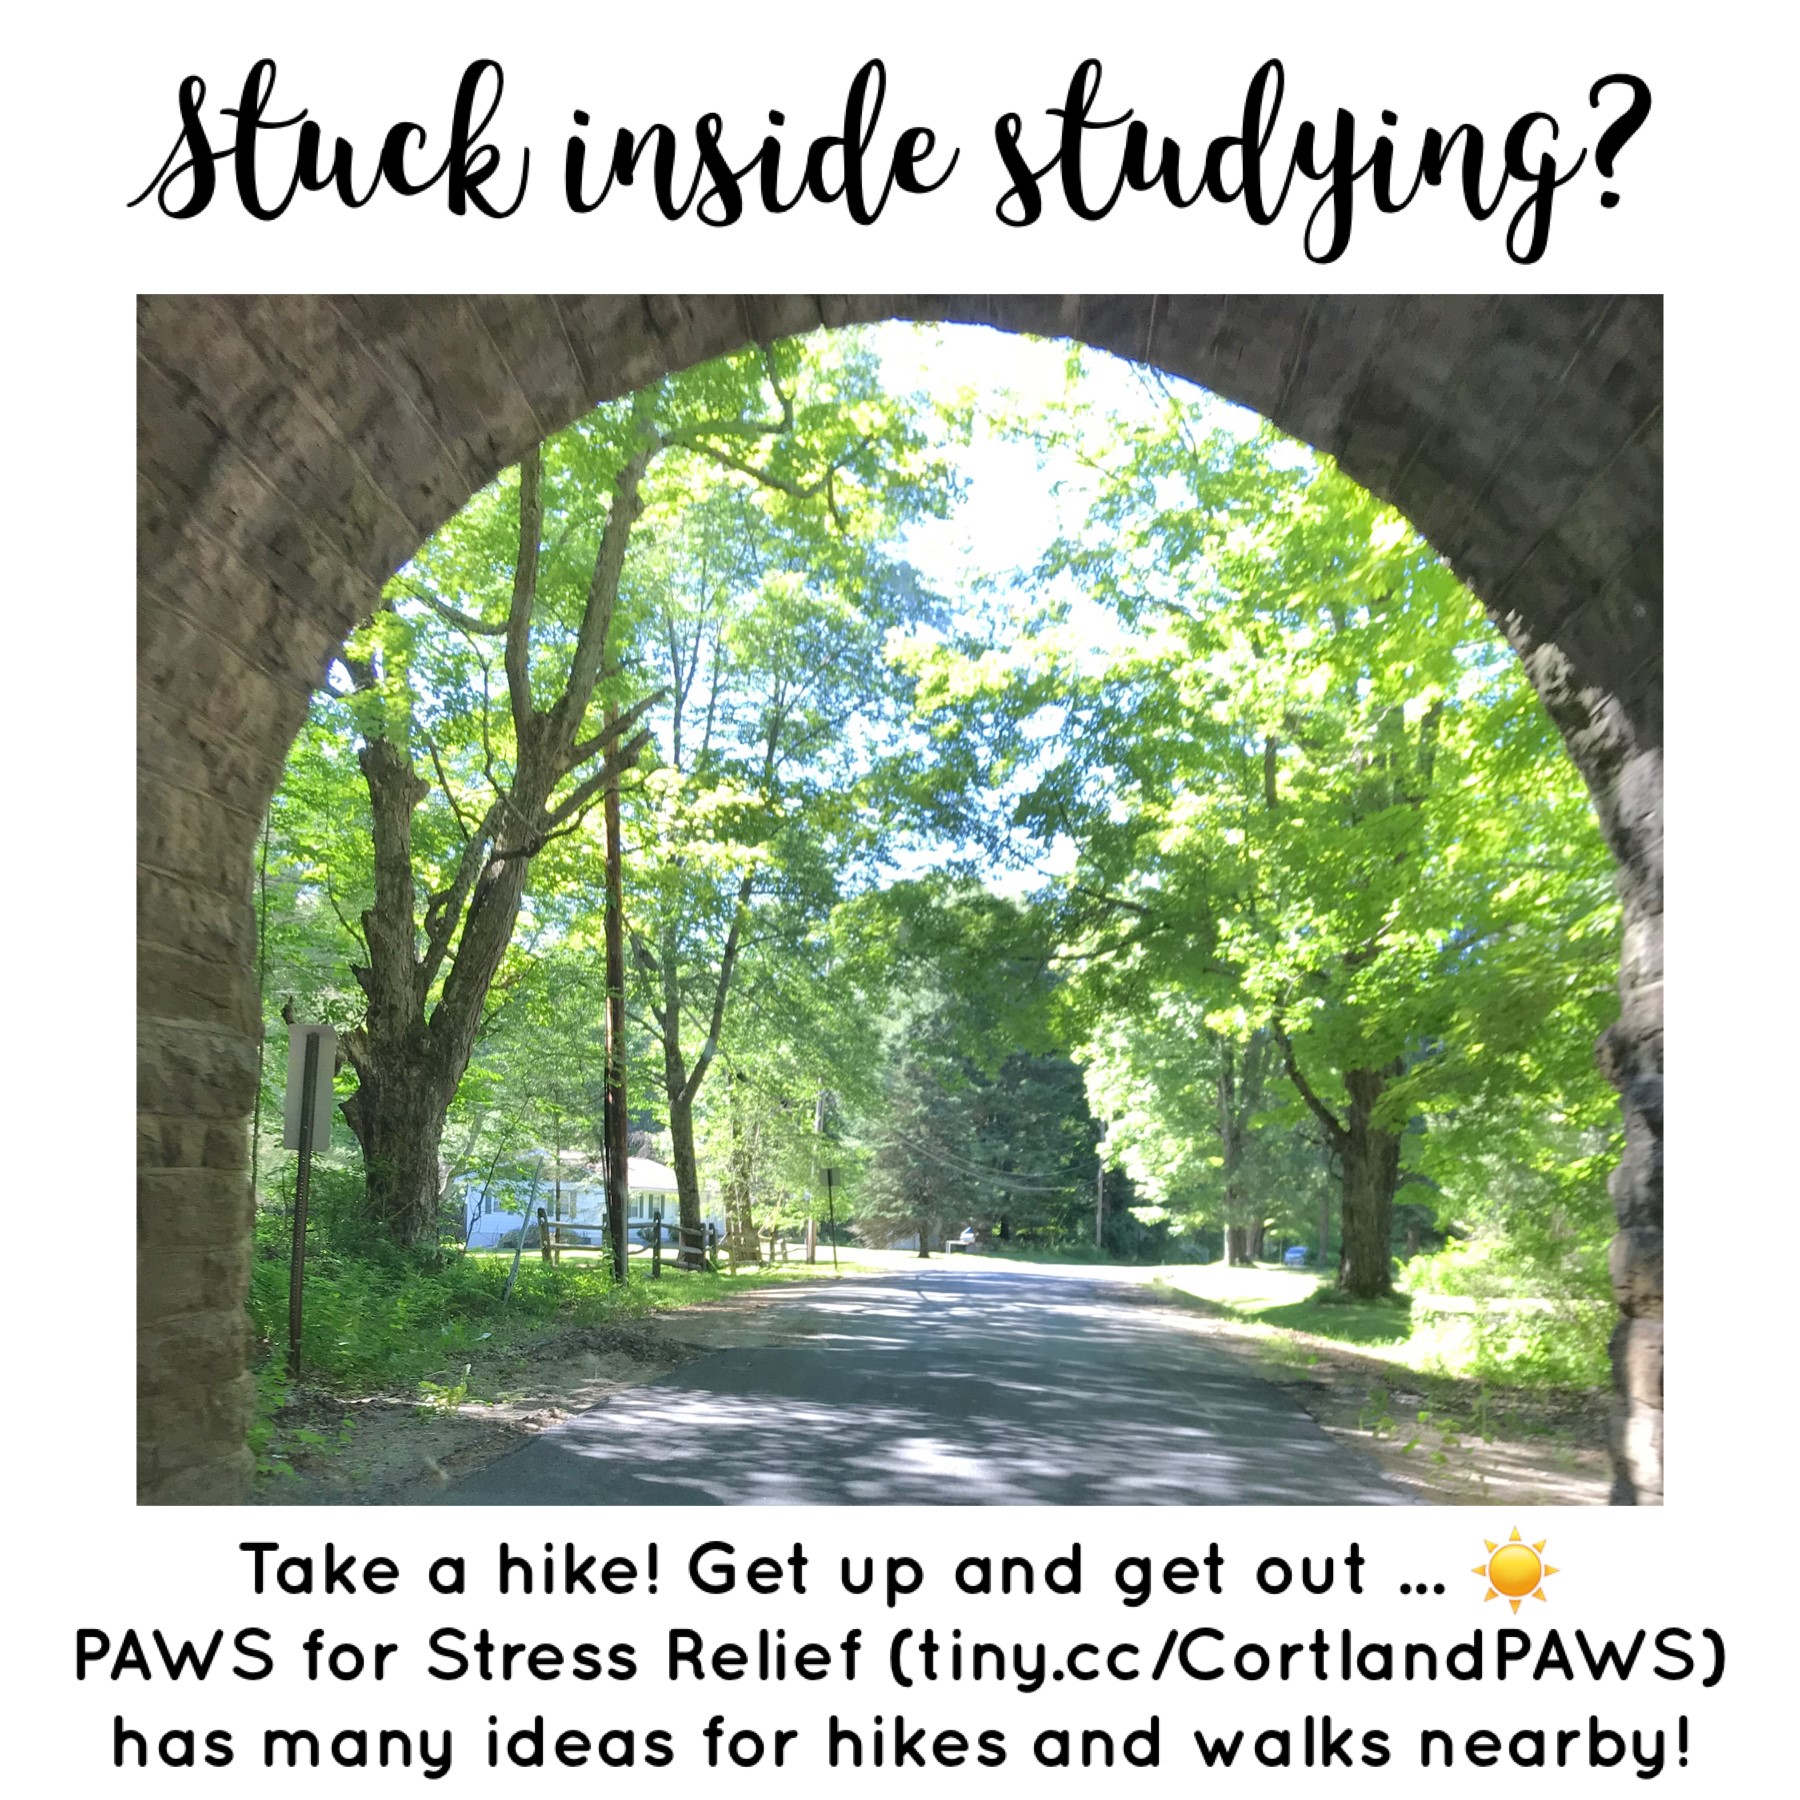 Image of a very green park as seen through a tunnel with text reading "Stuck inside studying? Take a hike! Get up and get out... PAWS for Stress Relief has many ideas for hikes and walks nearby!"